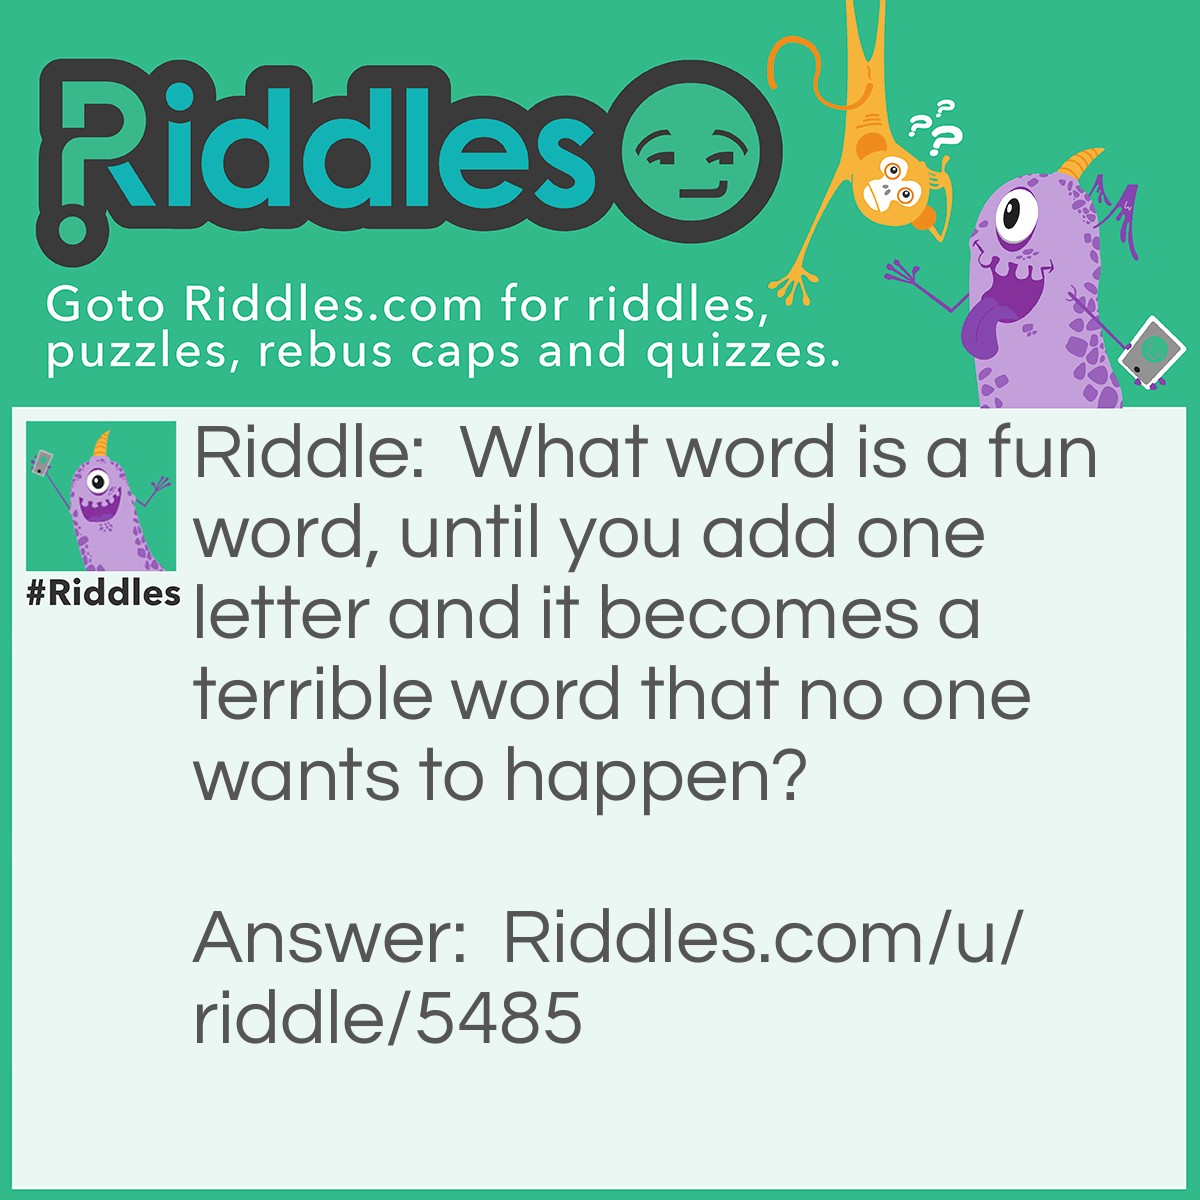 Riddle: What word is a fun word, until you add one letter and it becomes a terrible word that no one wants to happen? Answer: <a href="../../../funny-riddles"><strong>Laughter</strong></a>: If you add an 'S' to the begging of laughter it becomes slaughter.